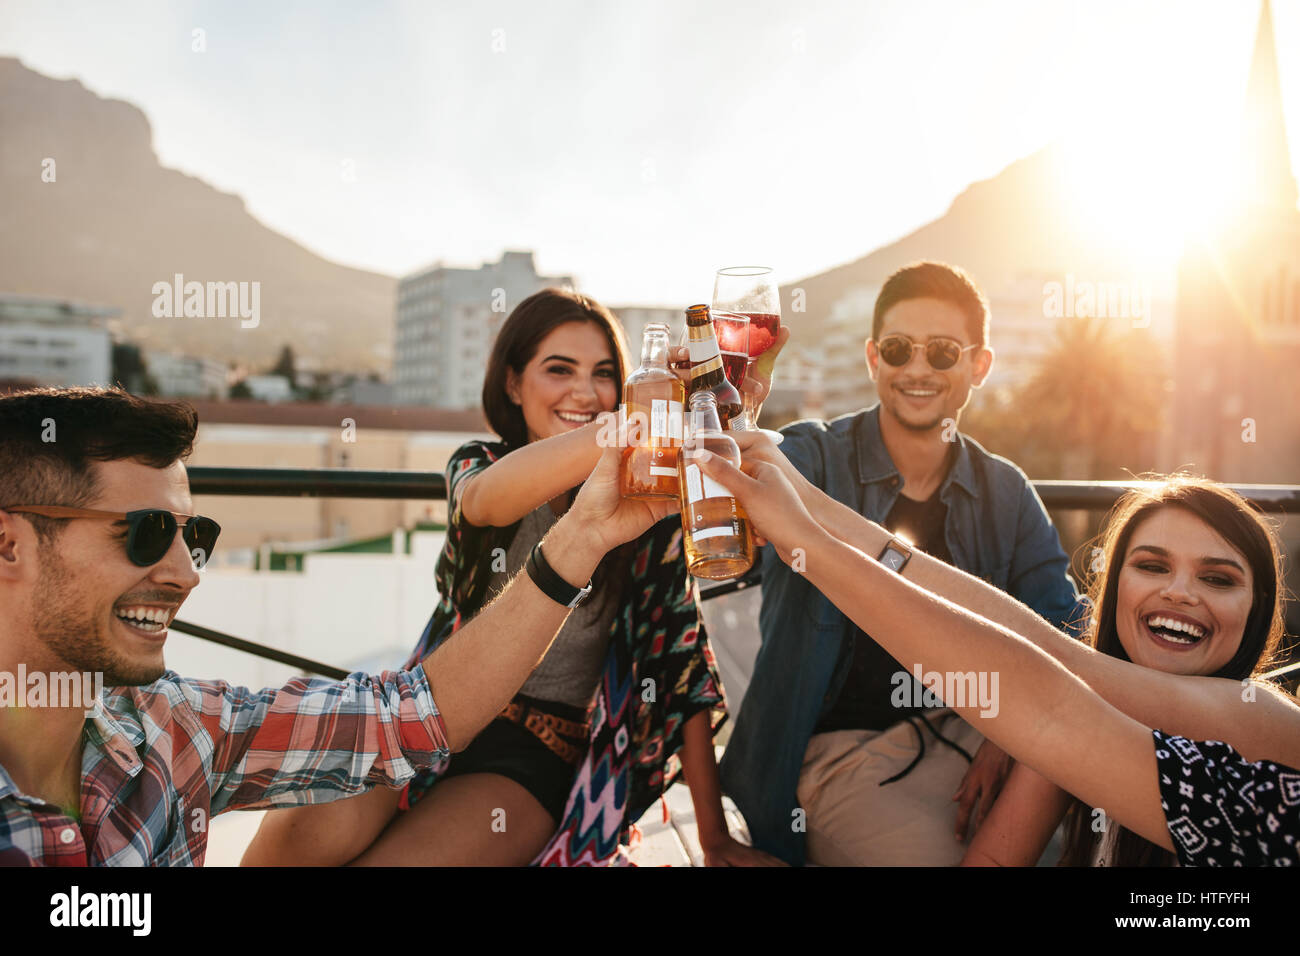 Friends having fun and drinking outdoor on a rooftop get together. Group of friends hanging out and toasting drinks outdoors. Stock Photo